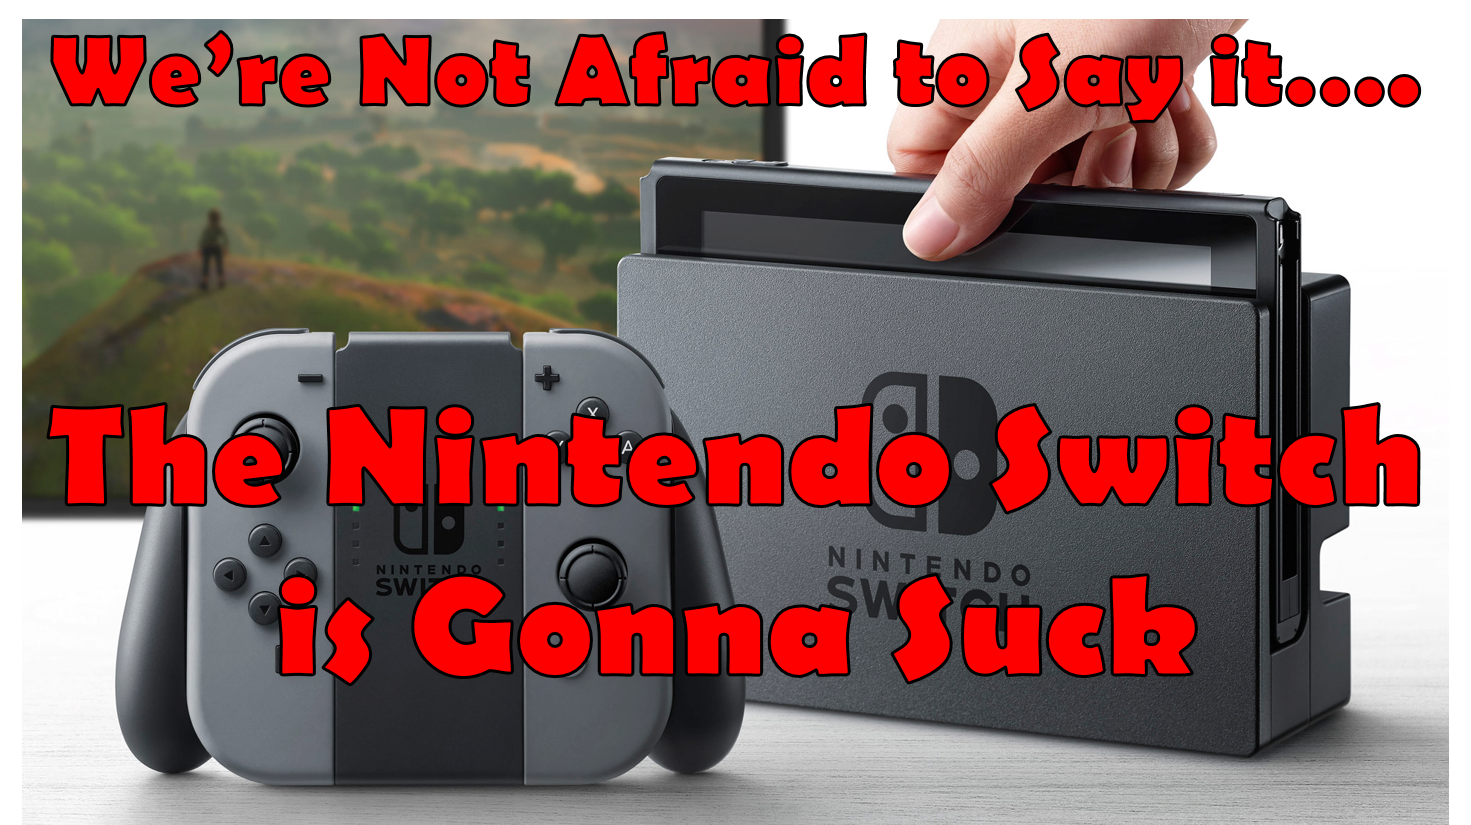 We’re Not Afraid To Say It: The Nintendo Switch Is Gonna Suck